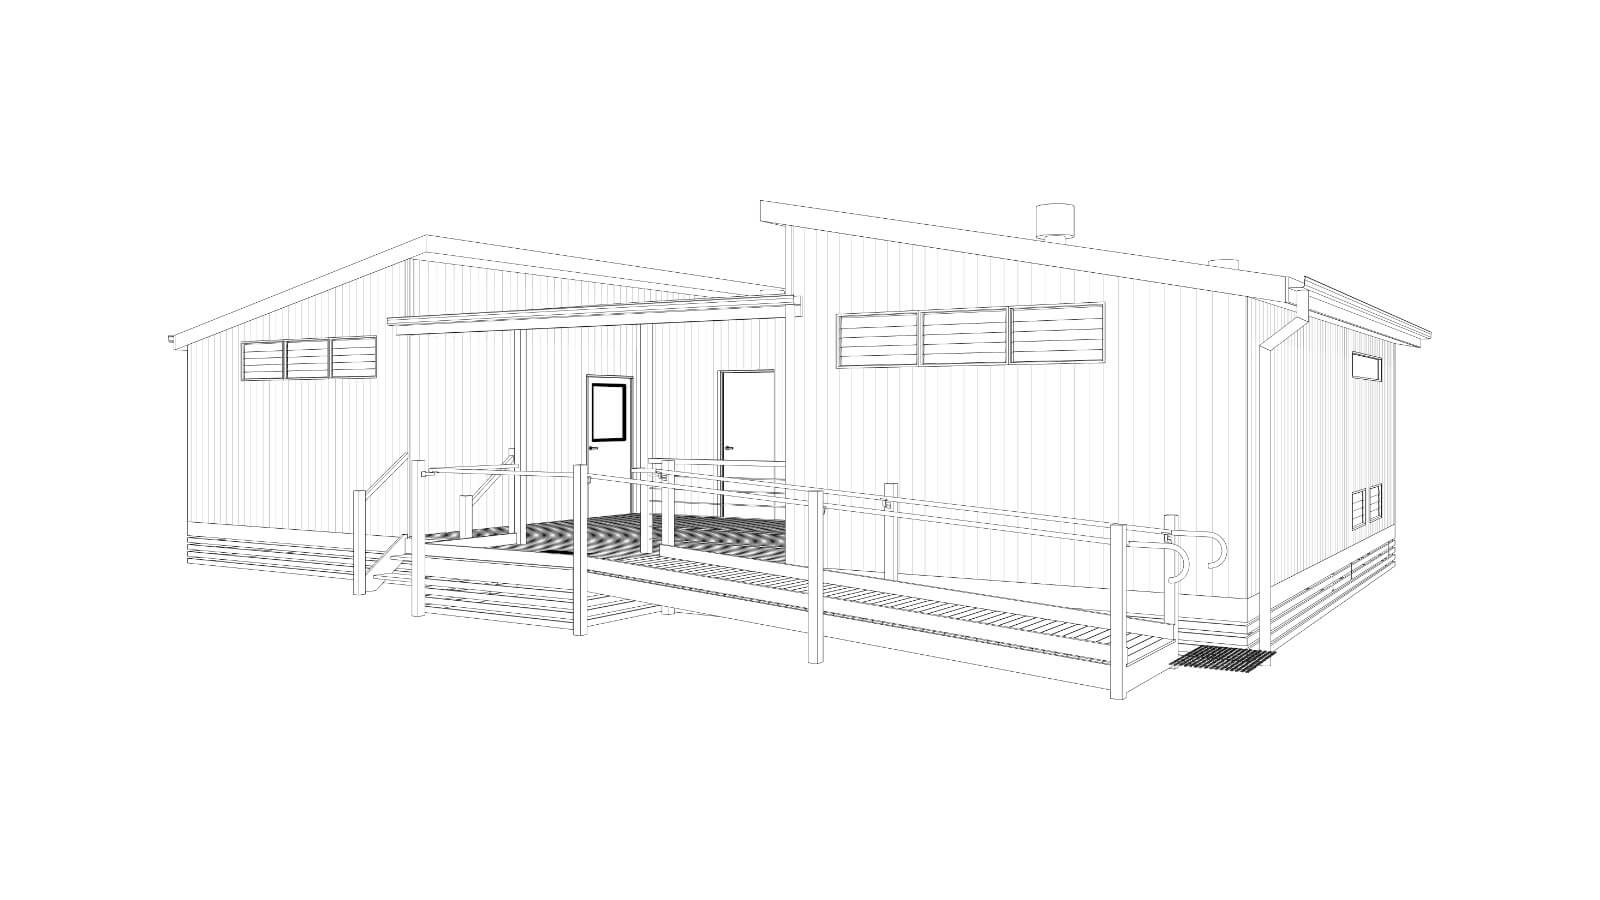 Rendered image of an Accessible Disabled Cabin